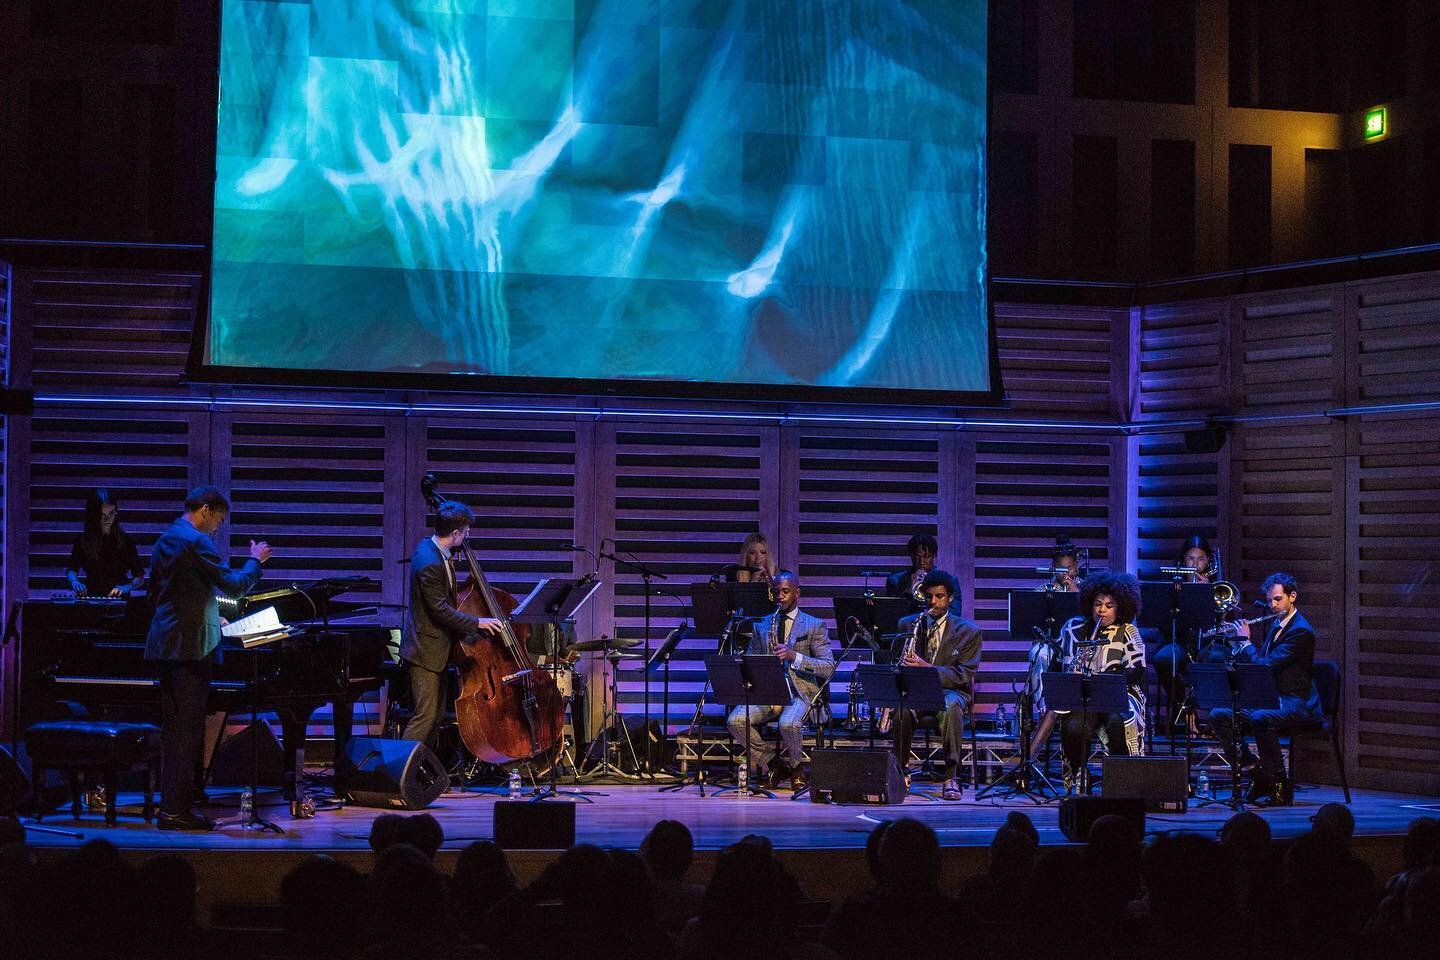 Photos from last Tuesday&rsquo;s show at Kings Place @kingsplacelondon with Nu Civilisation Orchestra - I thoroughly enjoyed working on the #livevisuals alongside the brilliant musicians in tribute to the great Joe Harriot. Thank you @tom_warriors ☄️